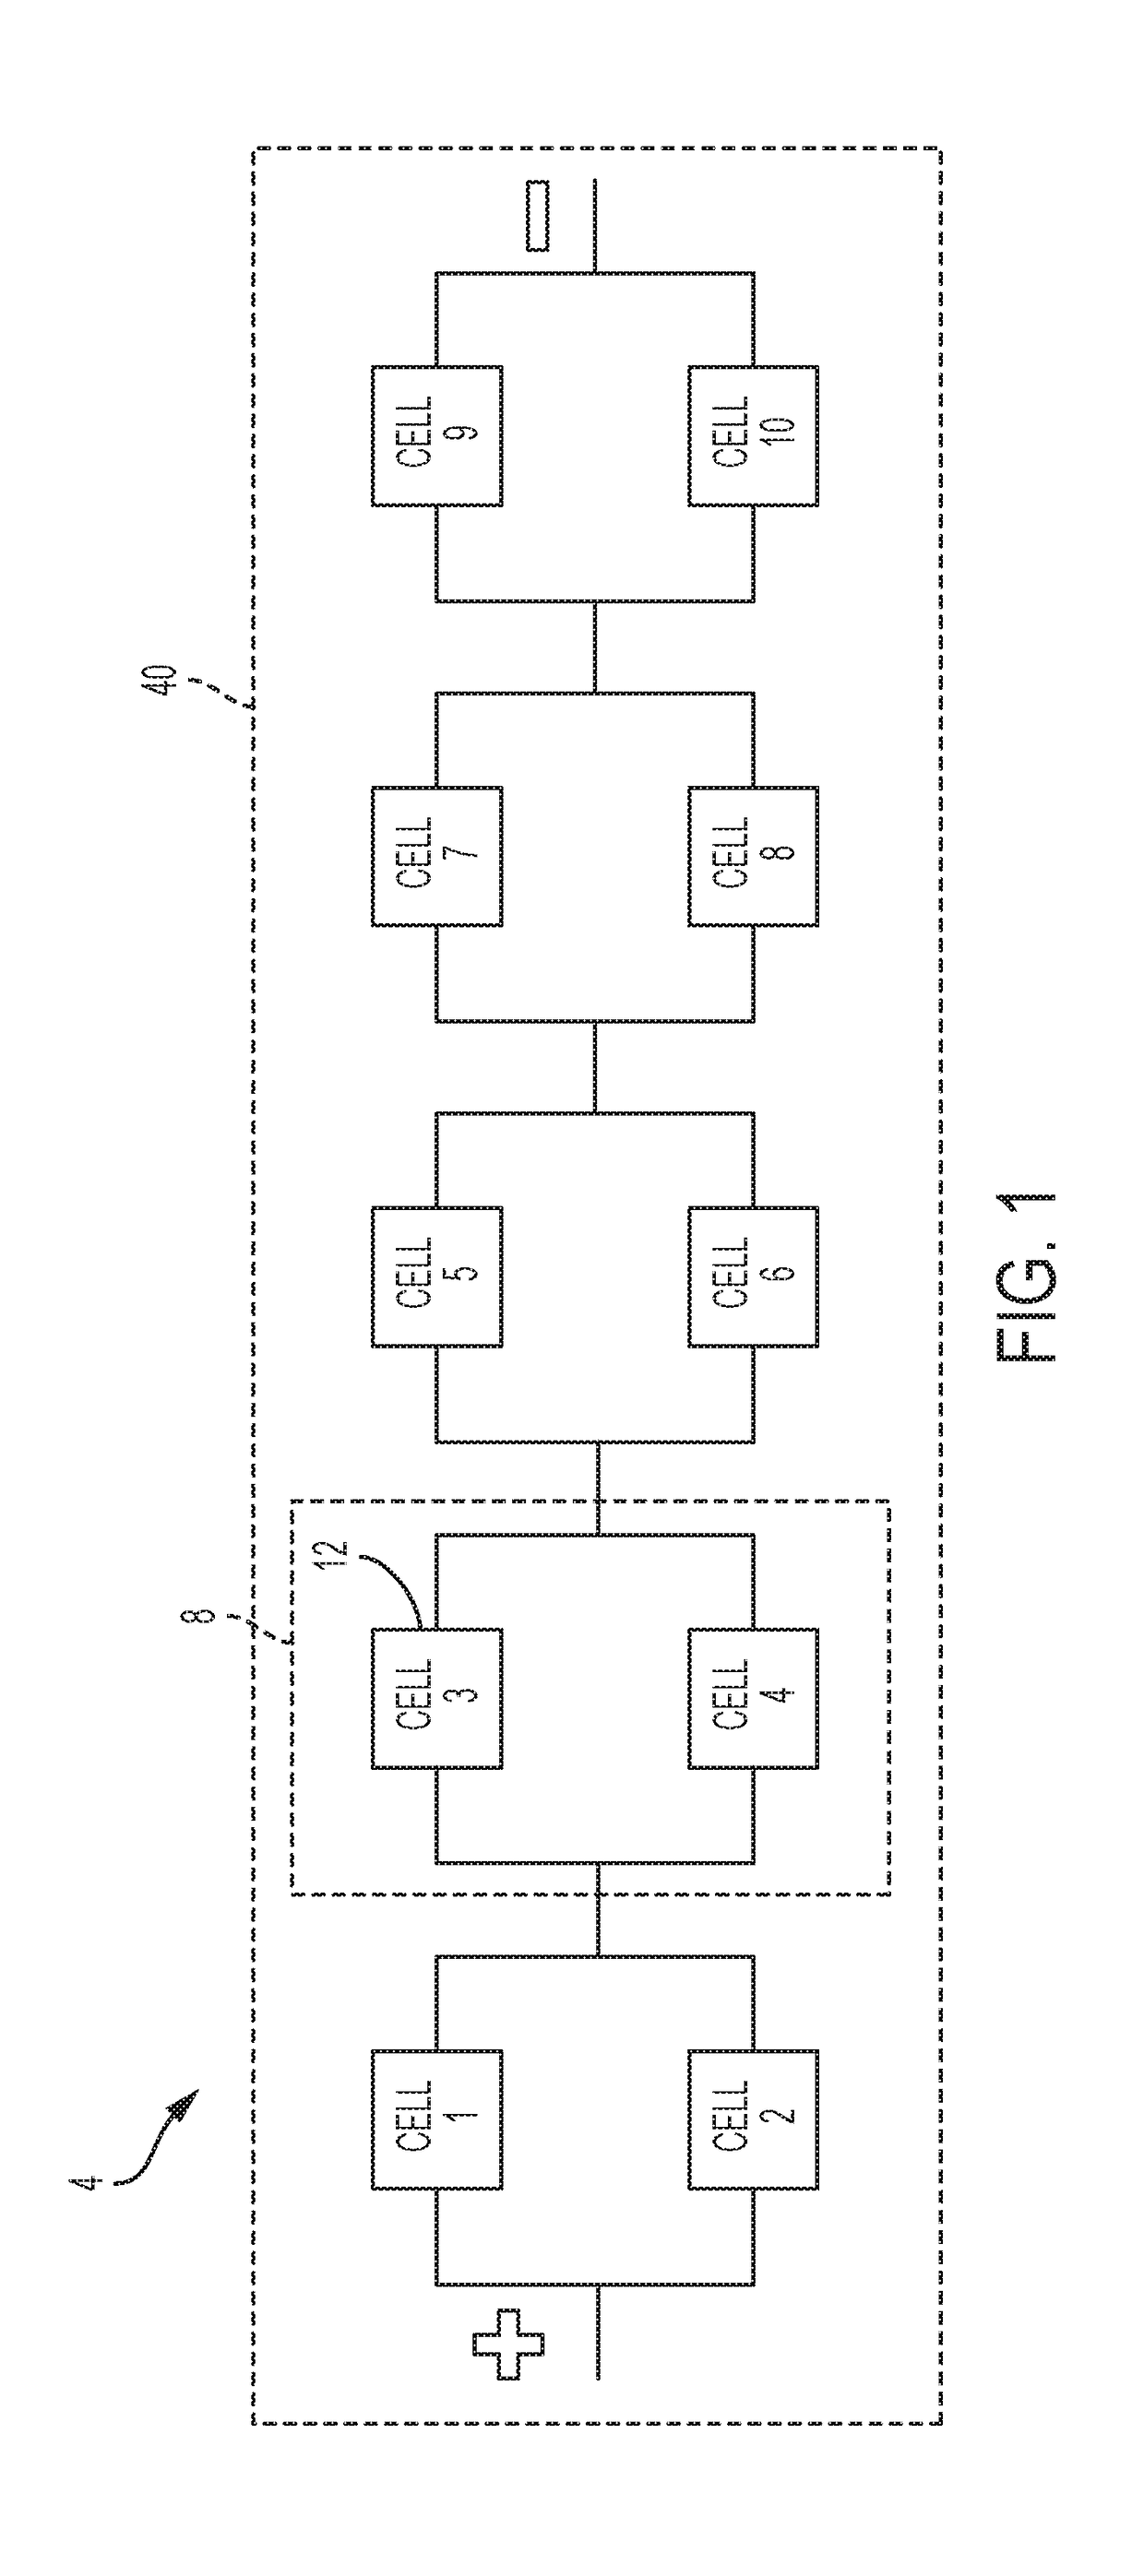 Method and apparatus for connecting a plurality of battery cells in series or parallel